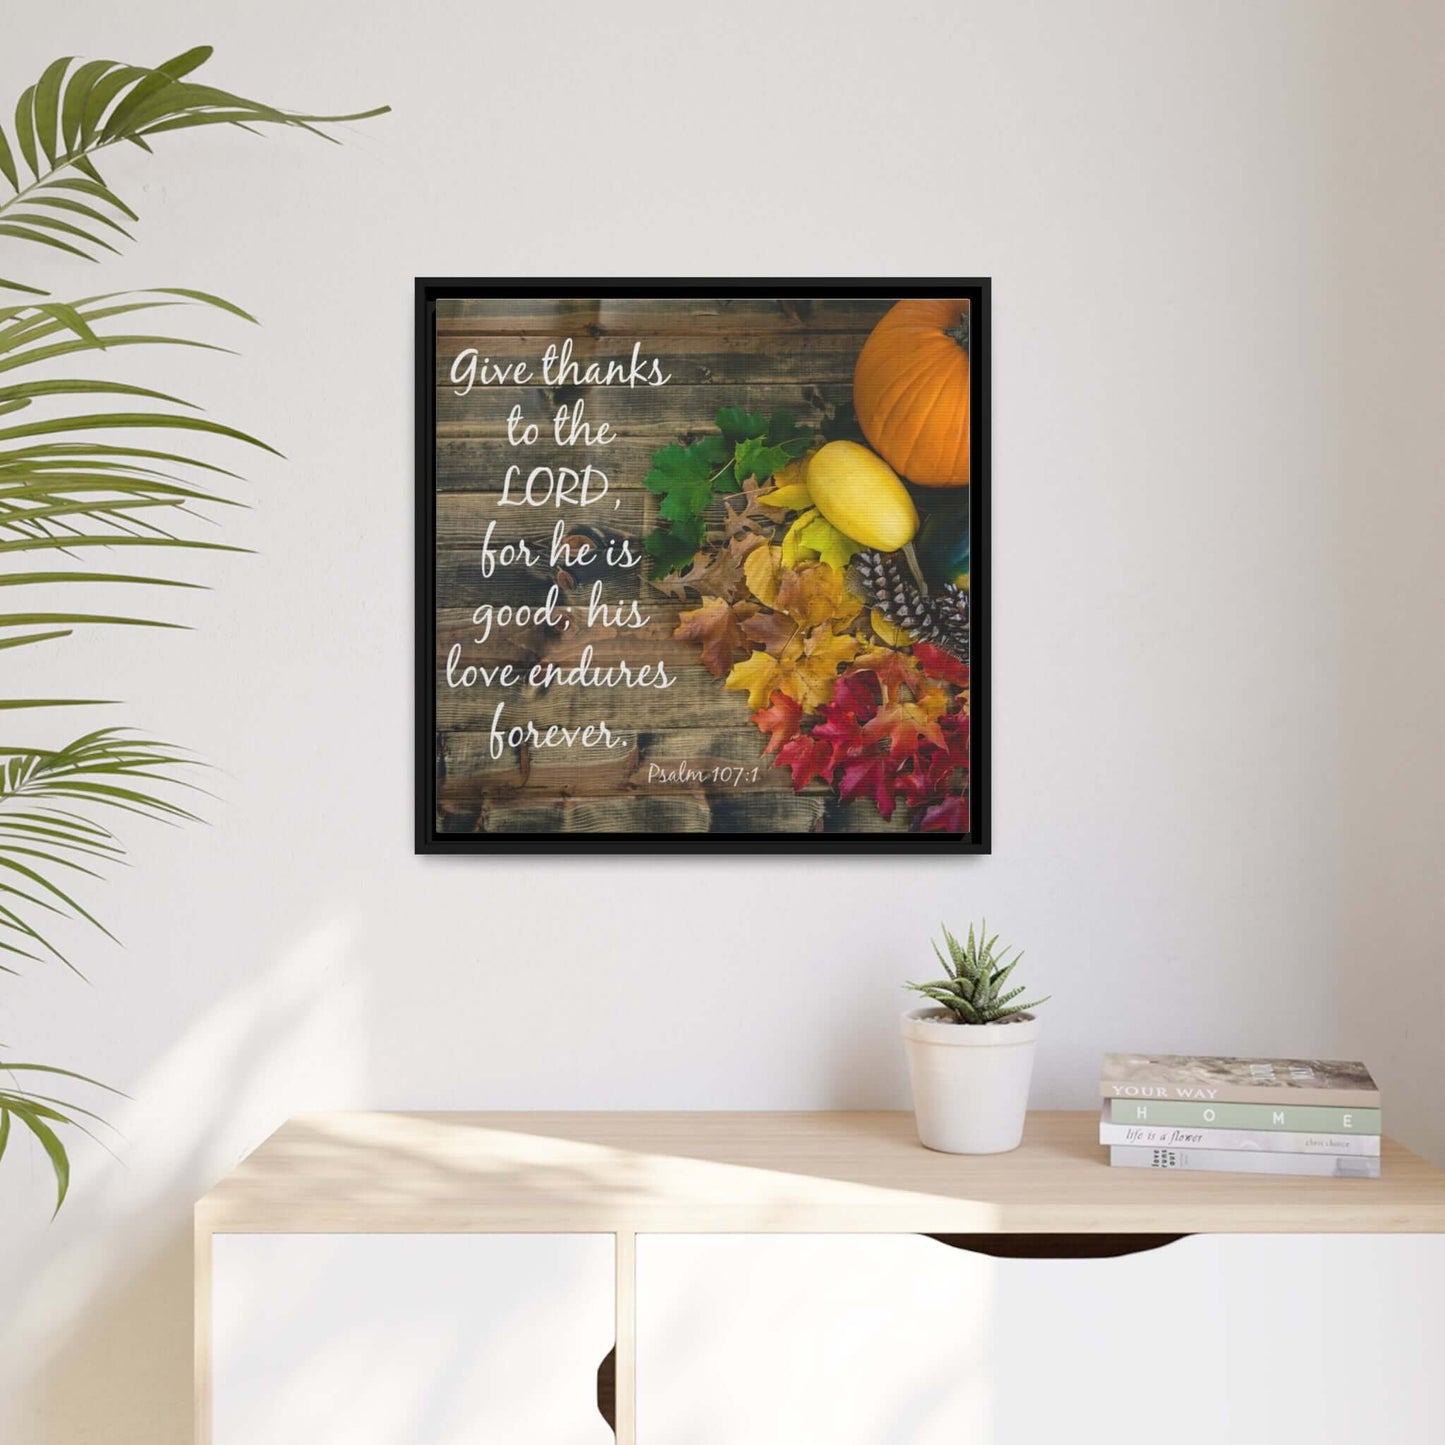 Elegant Canvas Painting Frame with Psalm 107:1 - Sustainable & Stylish | Art & Wall Decor,Canvas,Decor,Eco-friendly,Framed,Hanging Hardware,Home & Living,Summer Picks,Sustainable